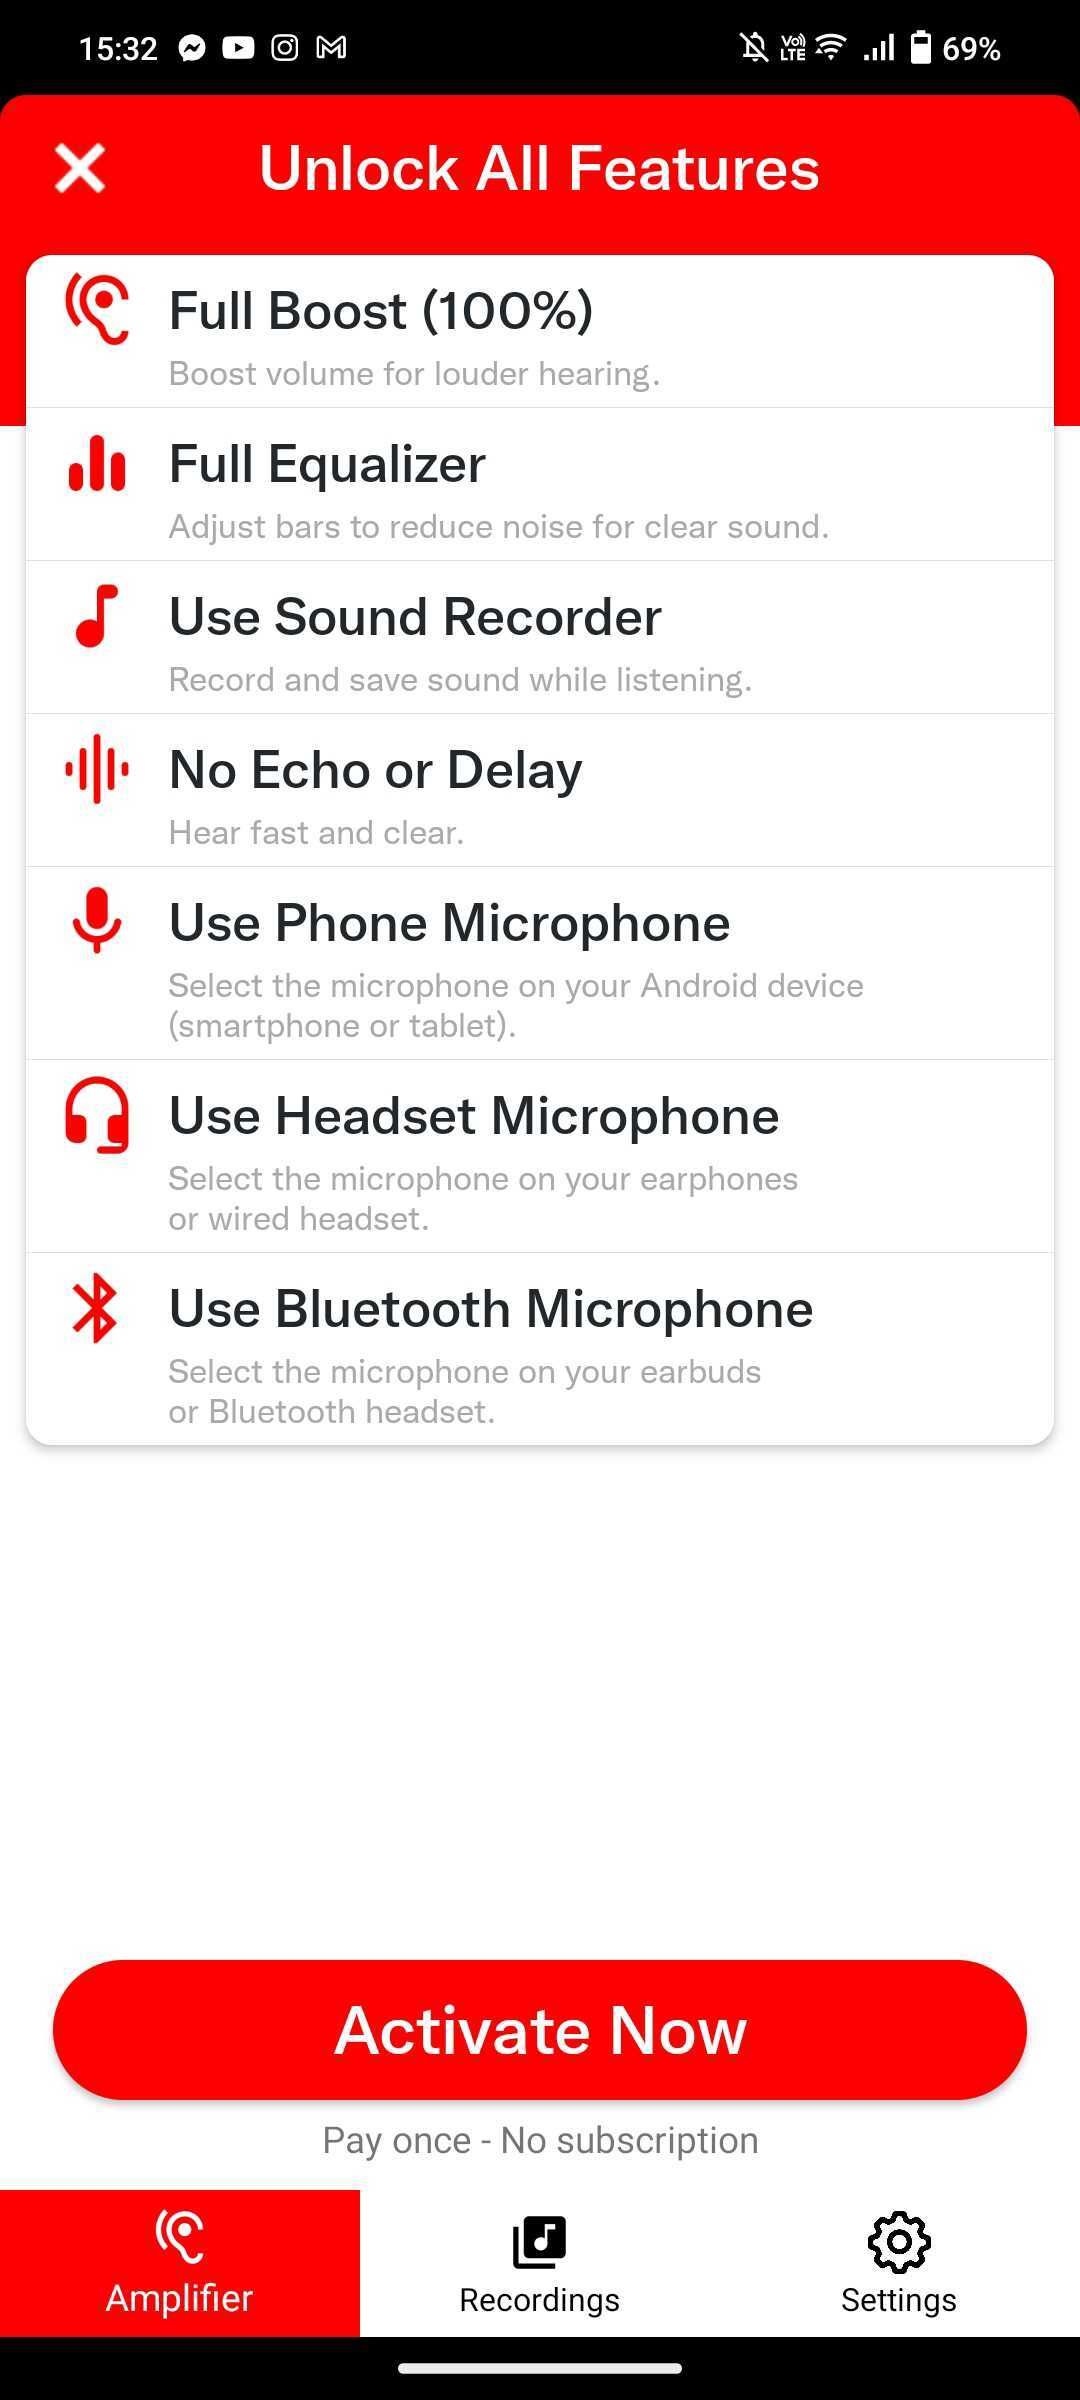 Mic Amplifier on Android purchase page